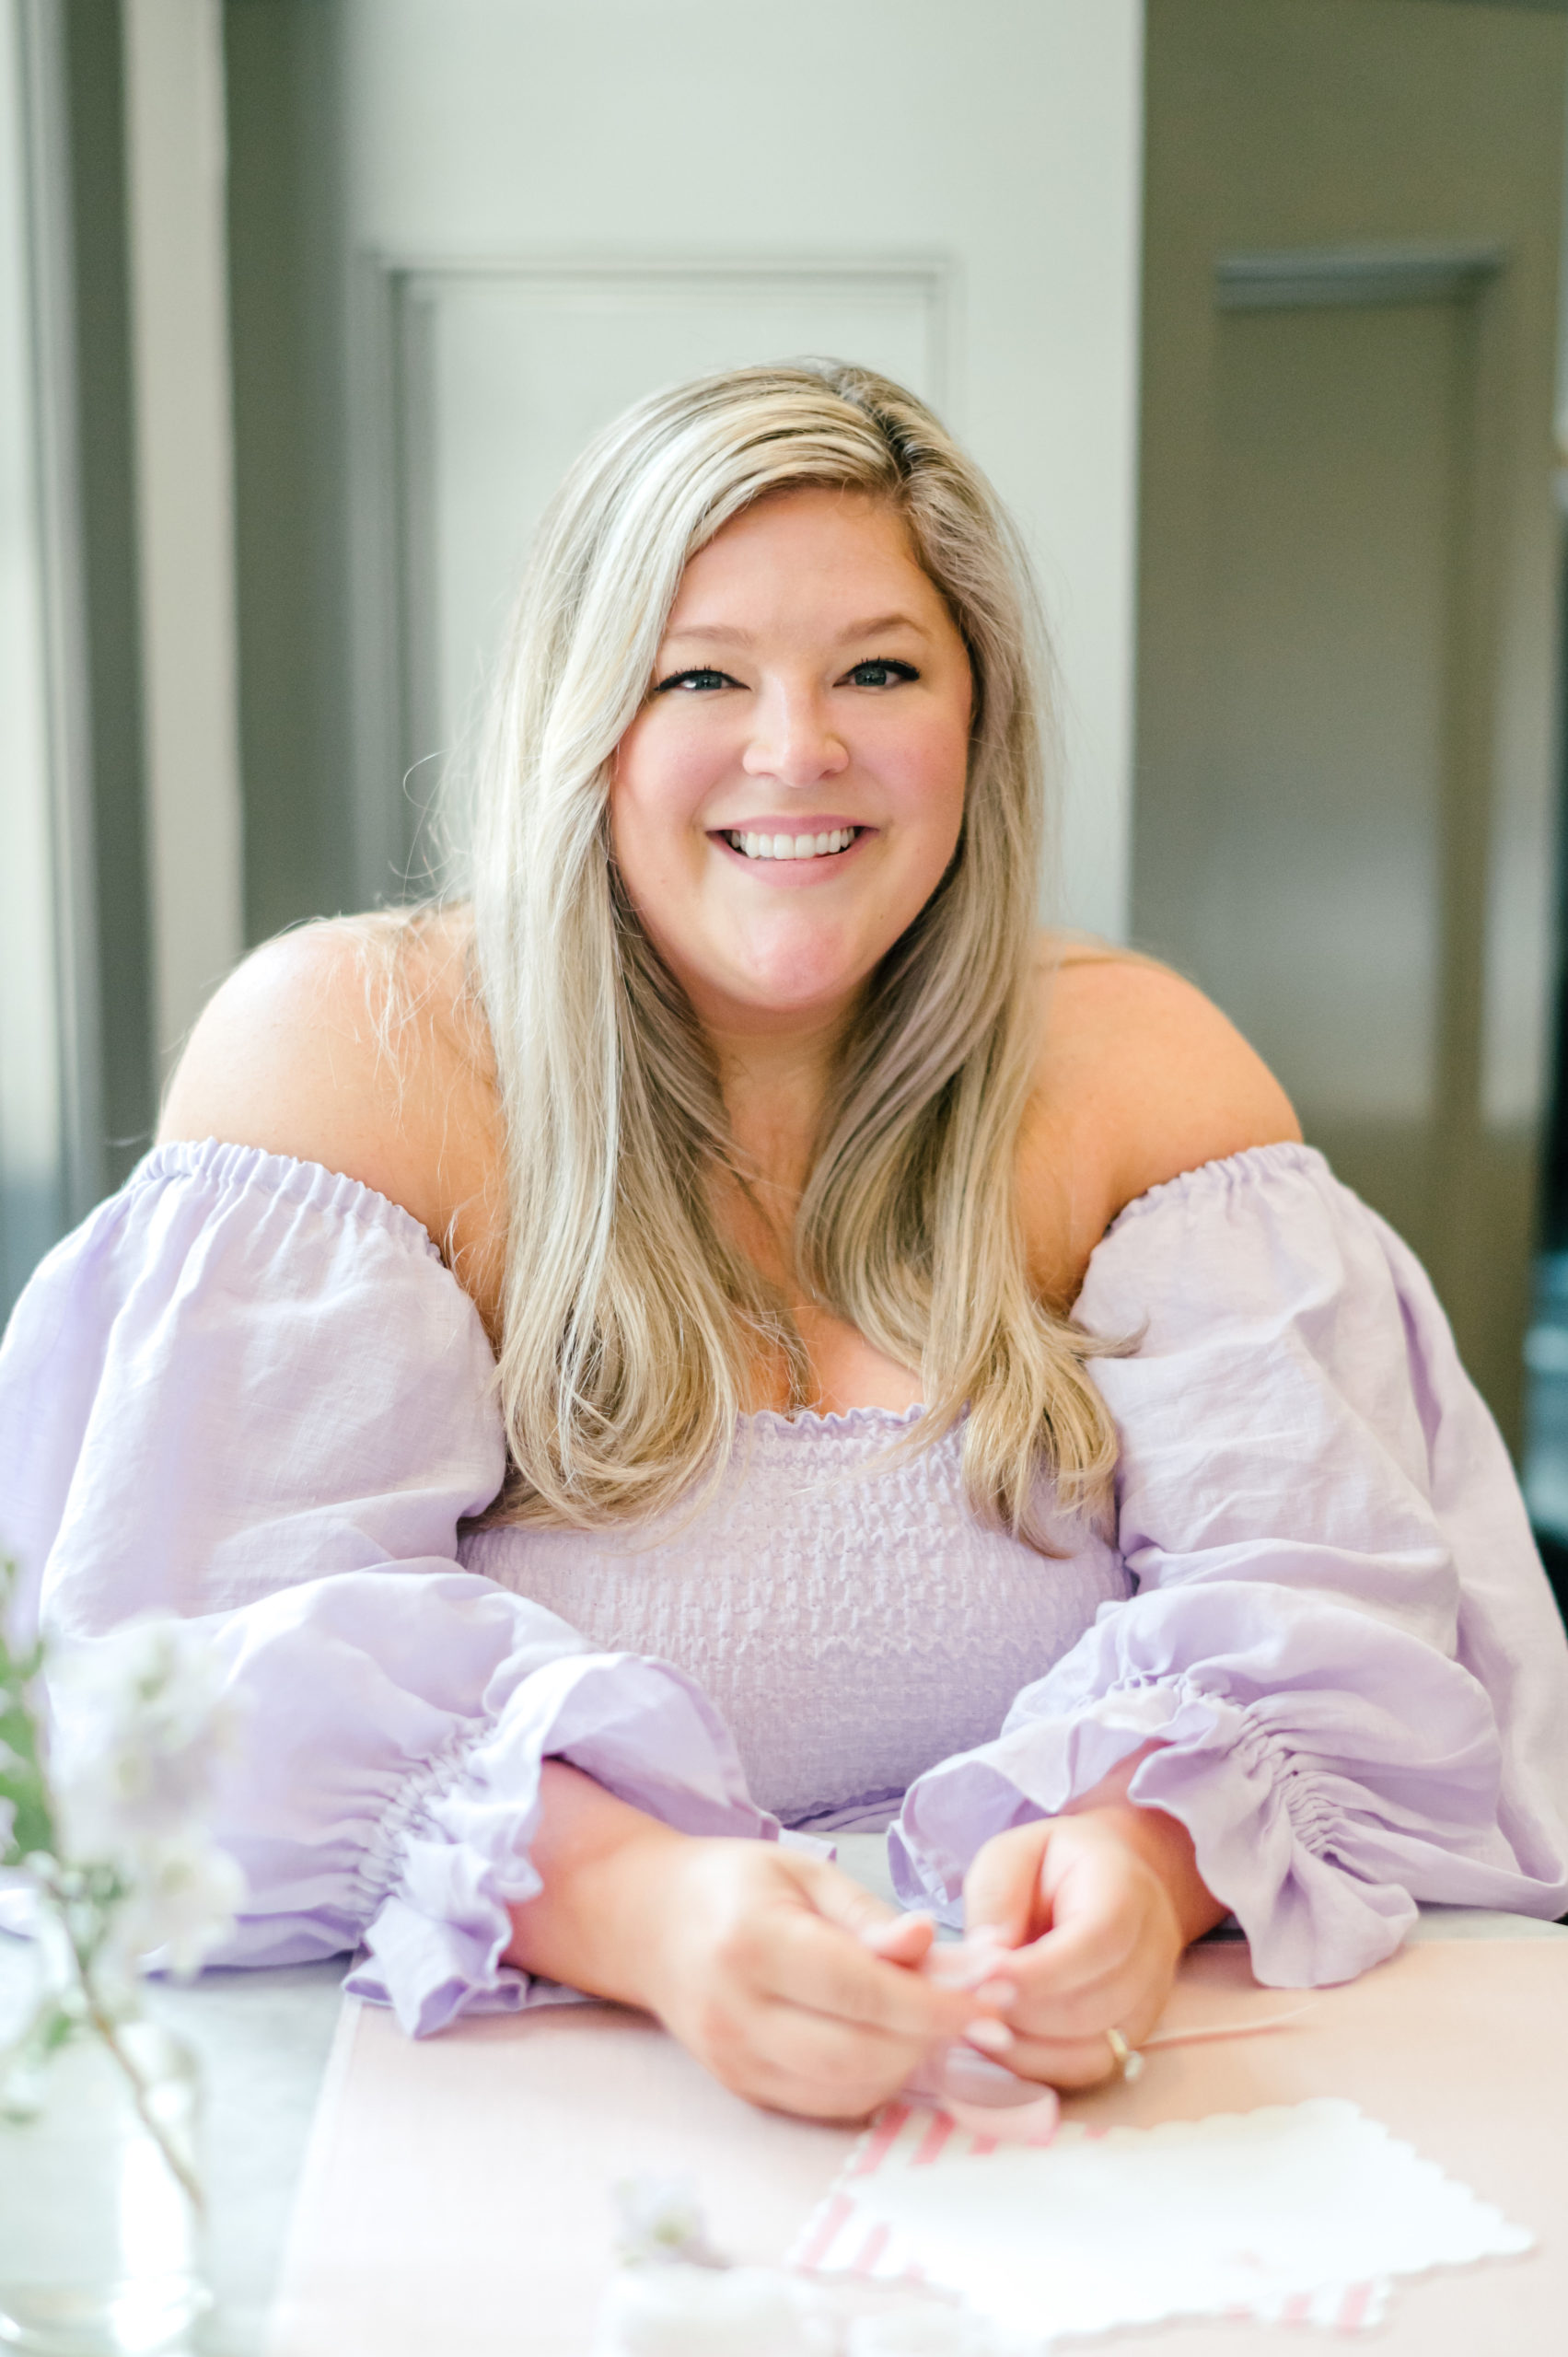 Woman smiling in a off the shoulder purple dress for her brand photoshoot